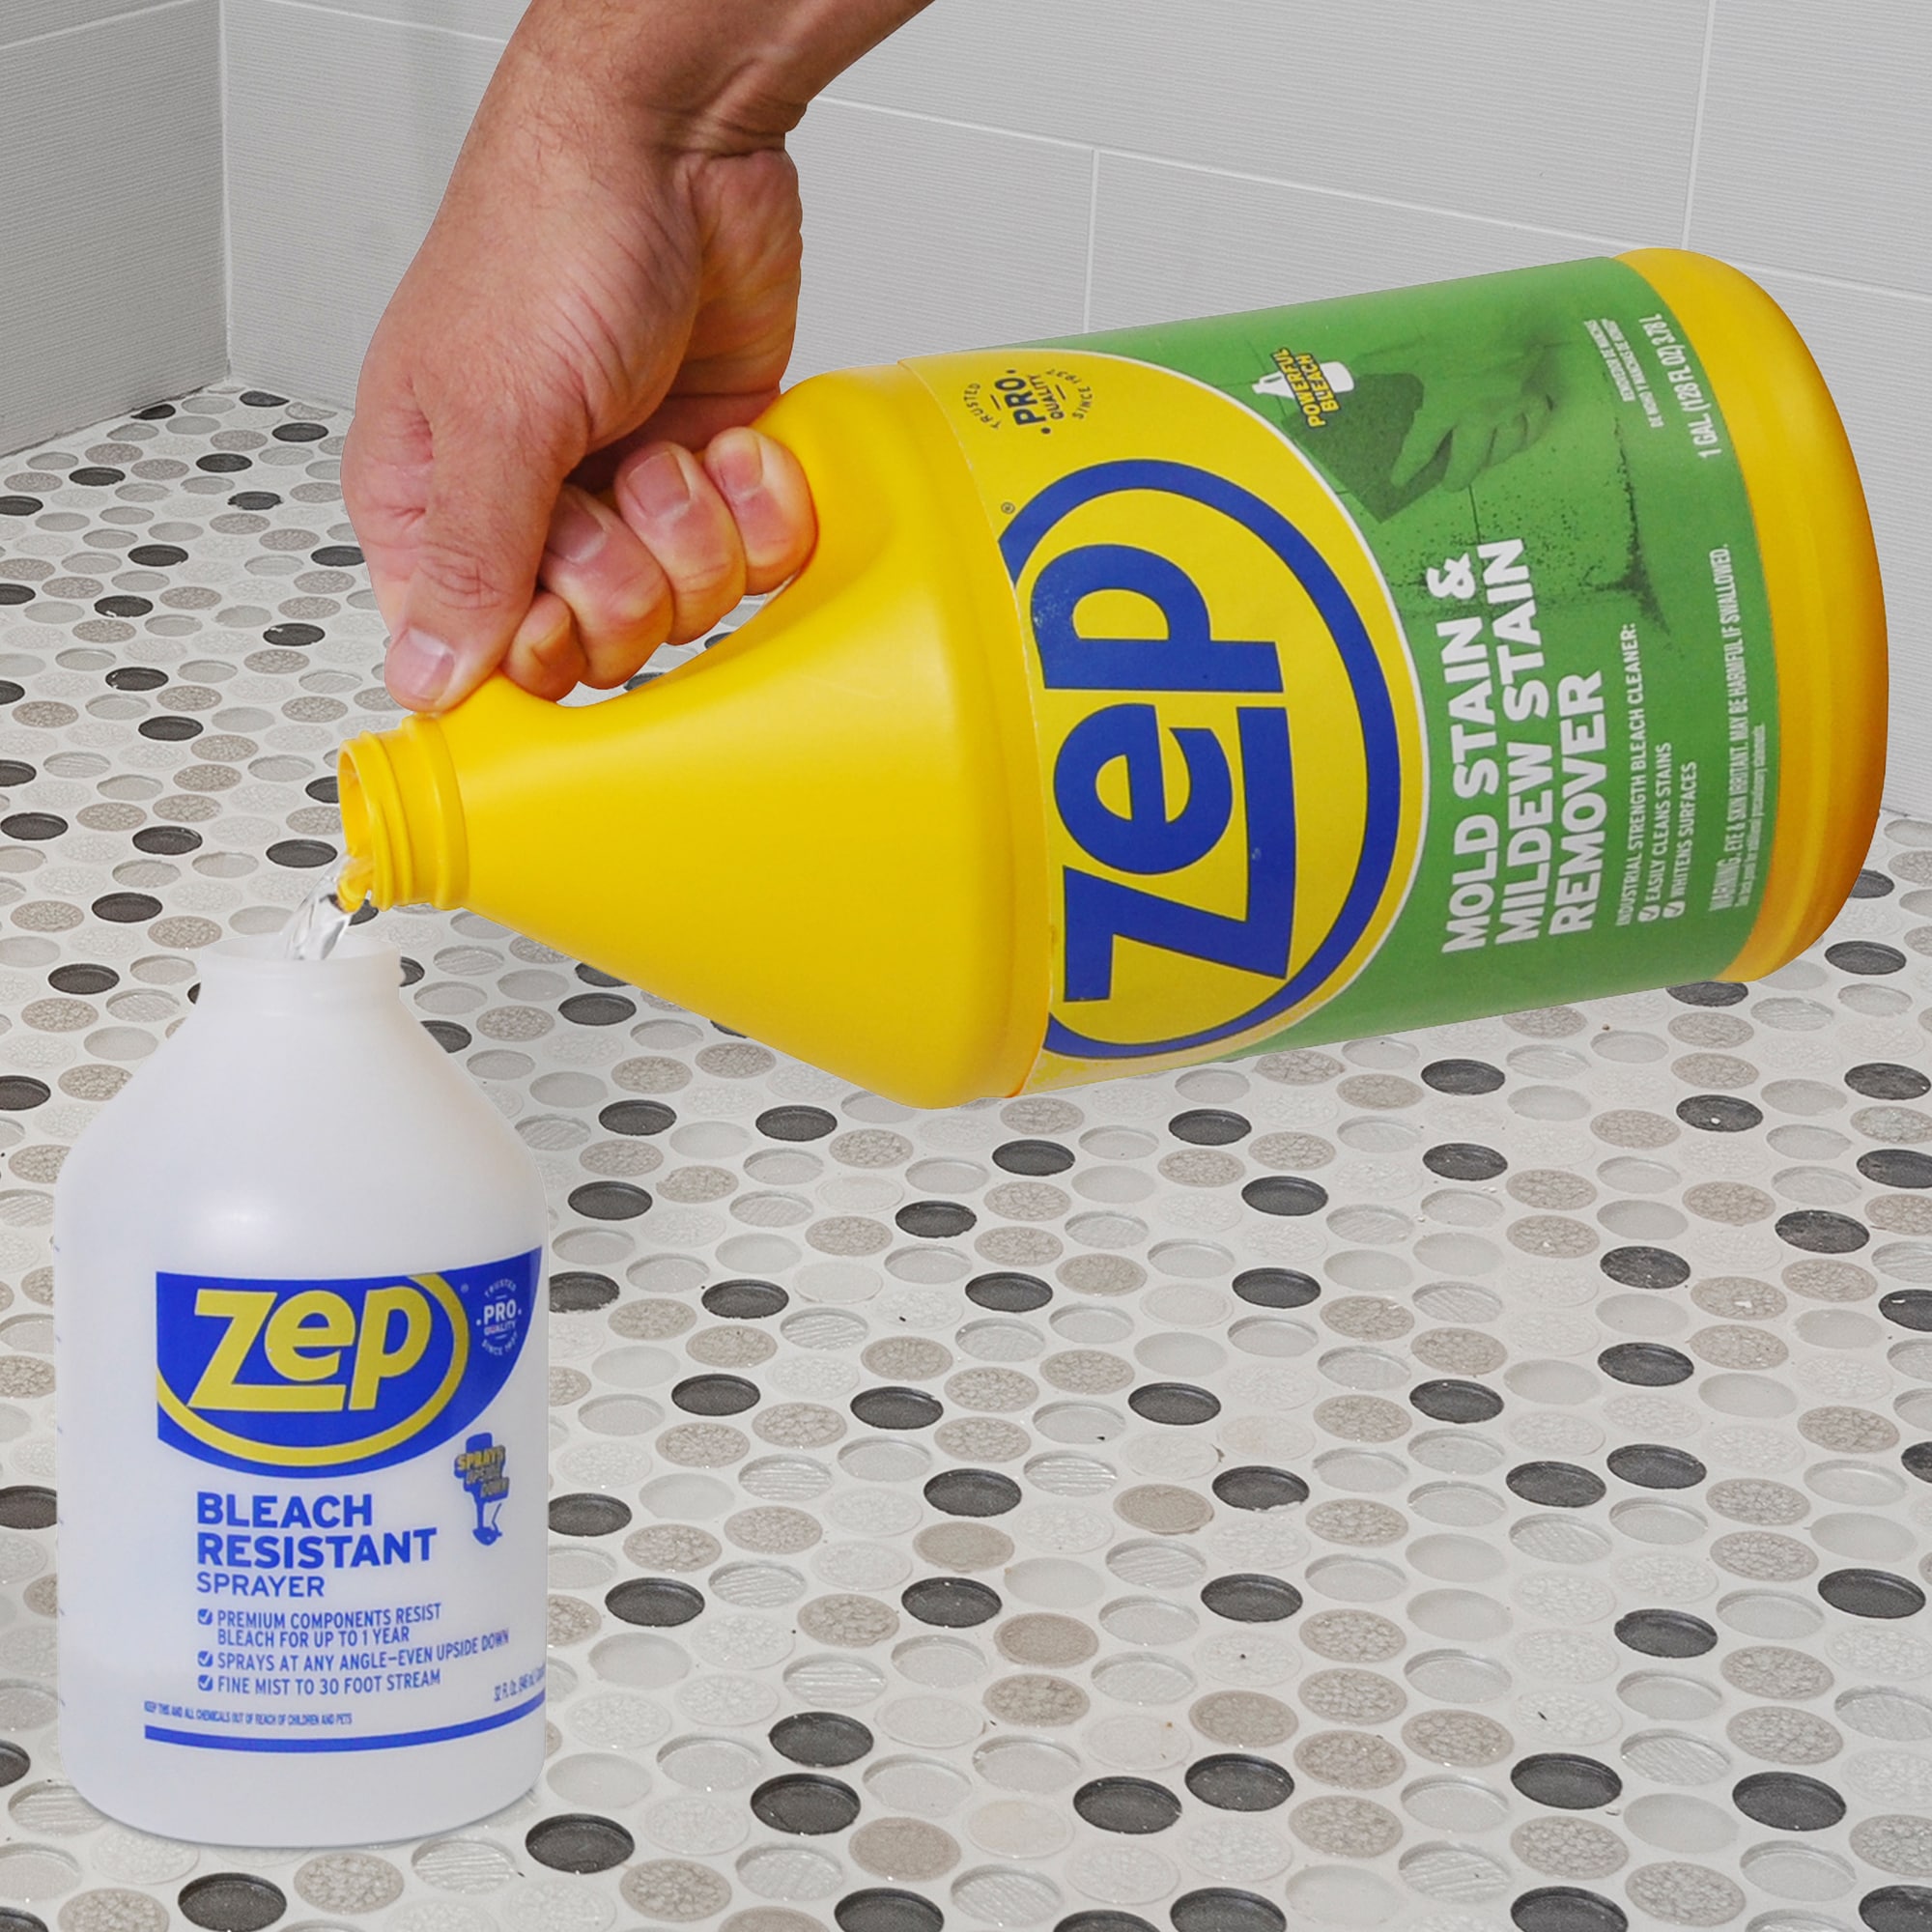 Zep 128-fl oz Liquid Mold Remover in the Mold Removers department